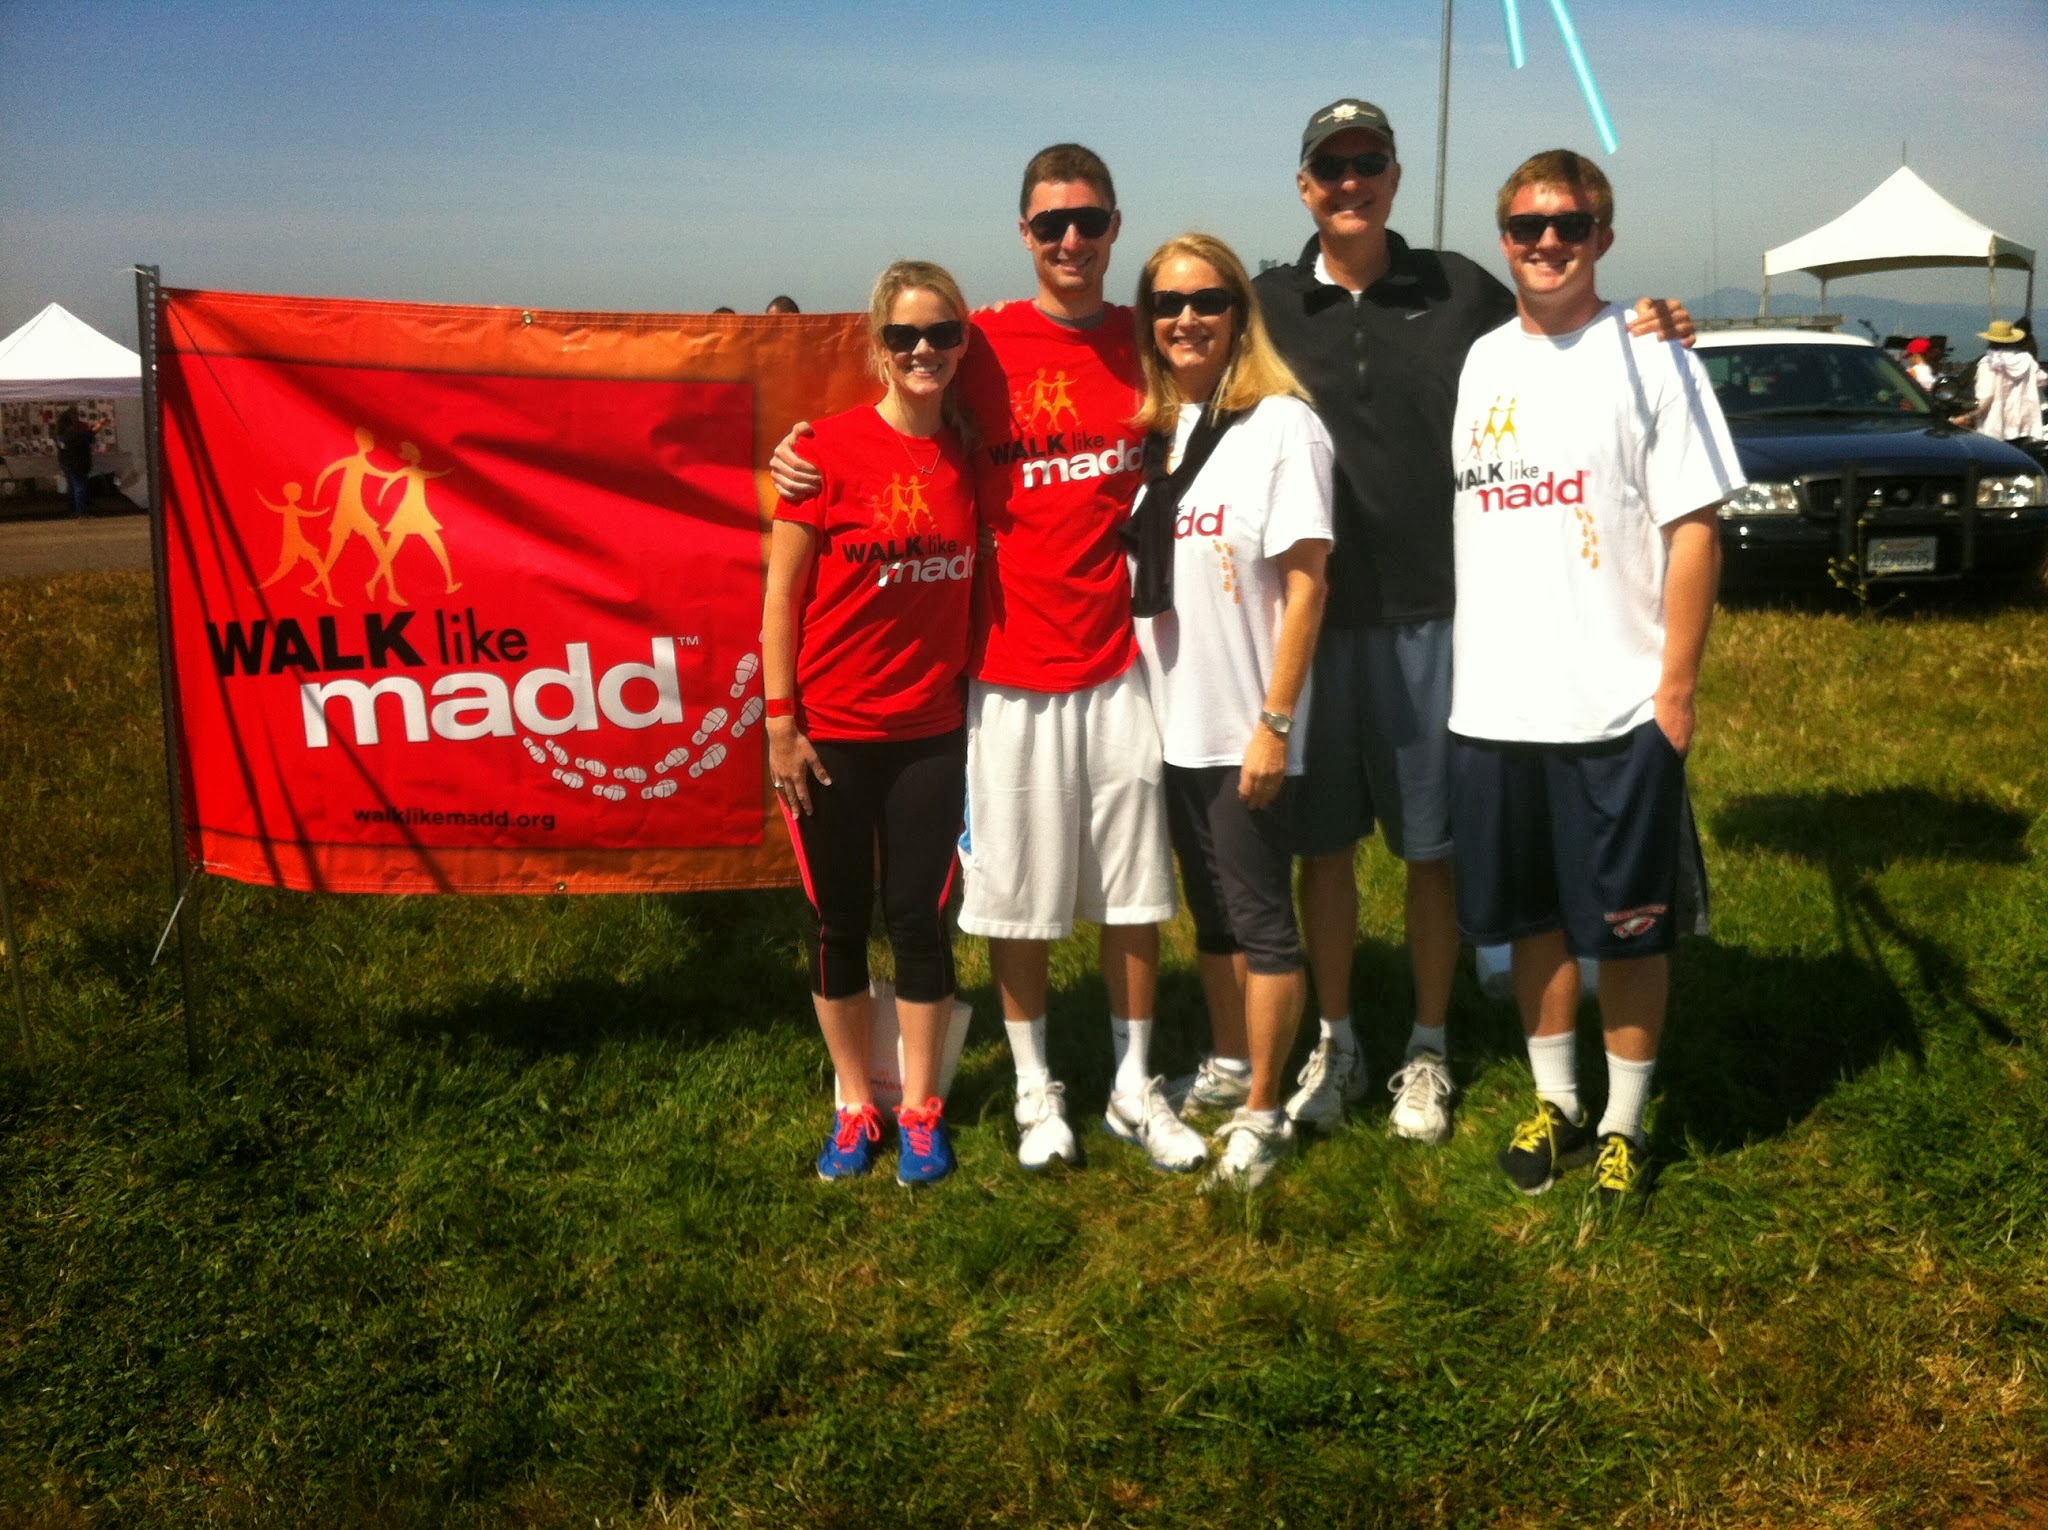 Ryan and Alyssa's first MADD event